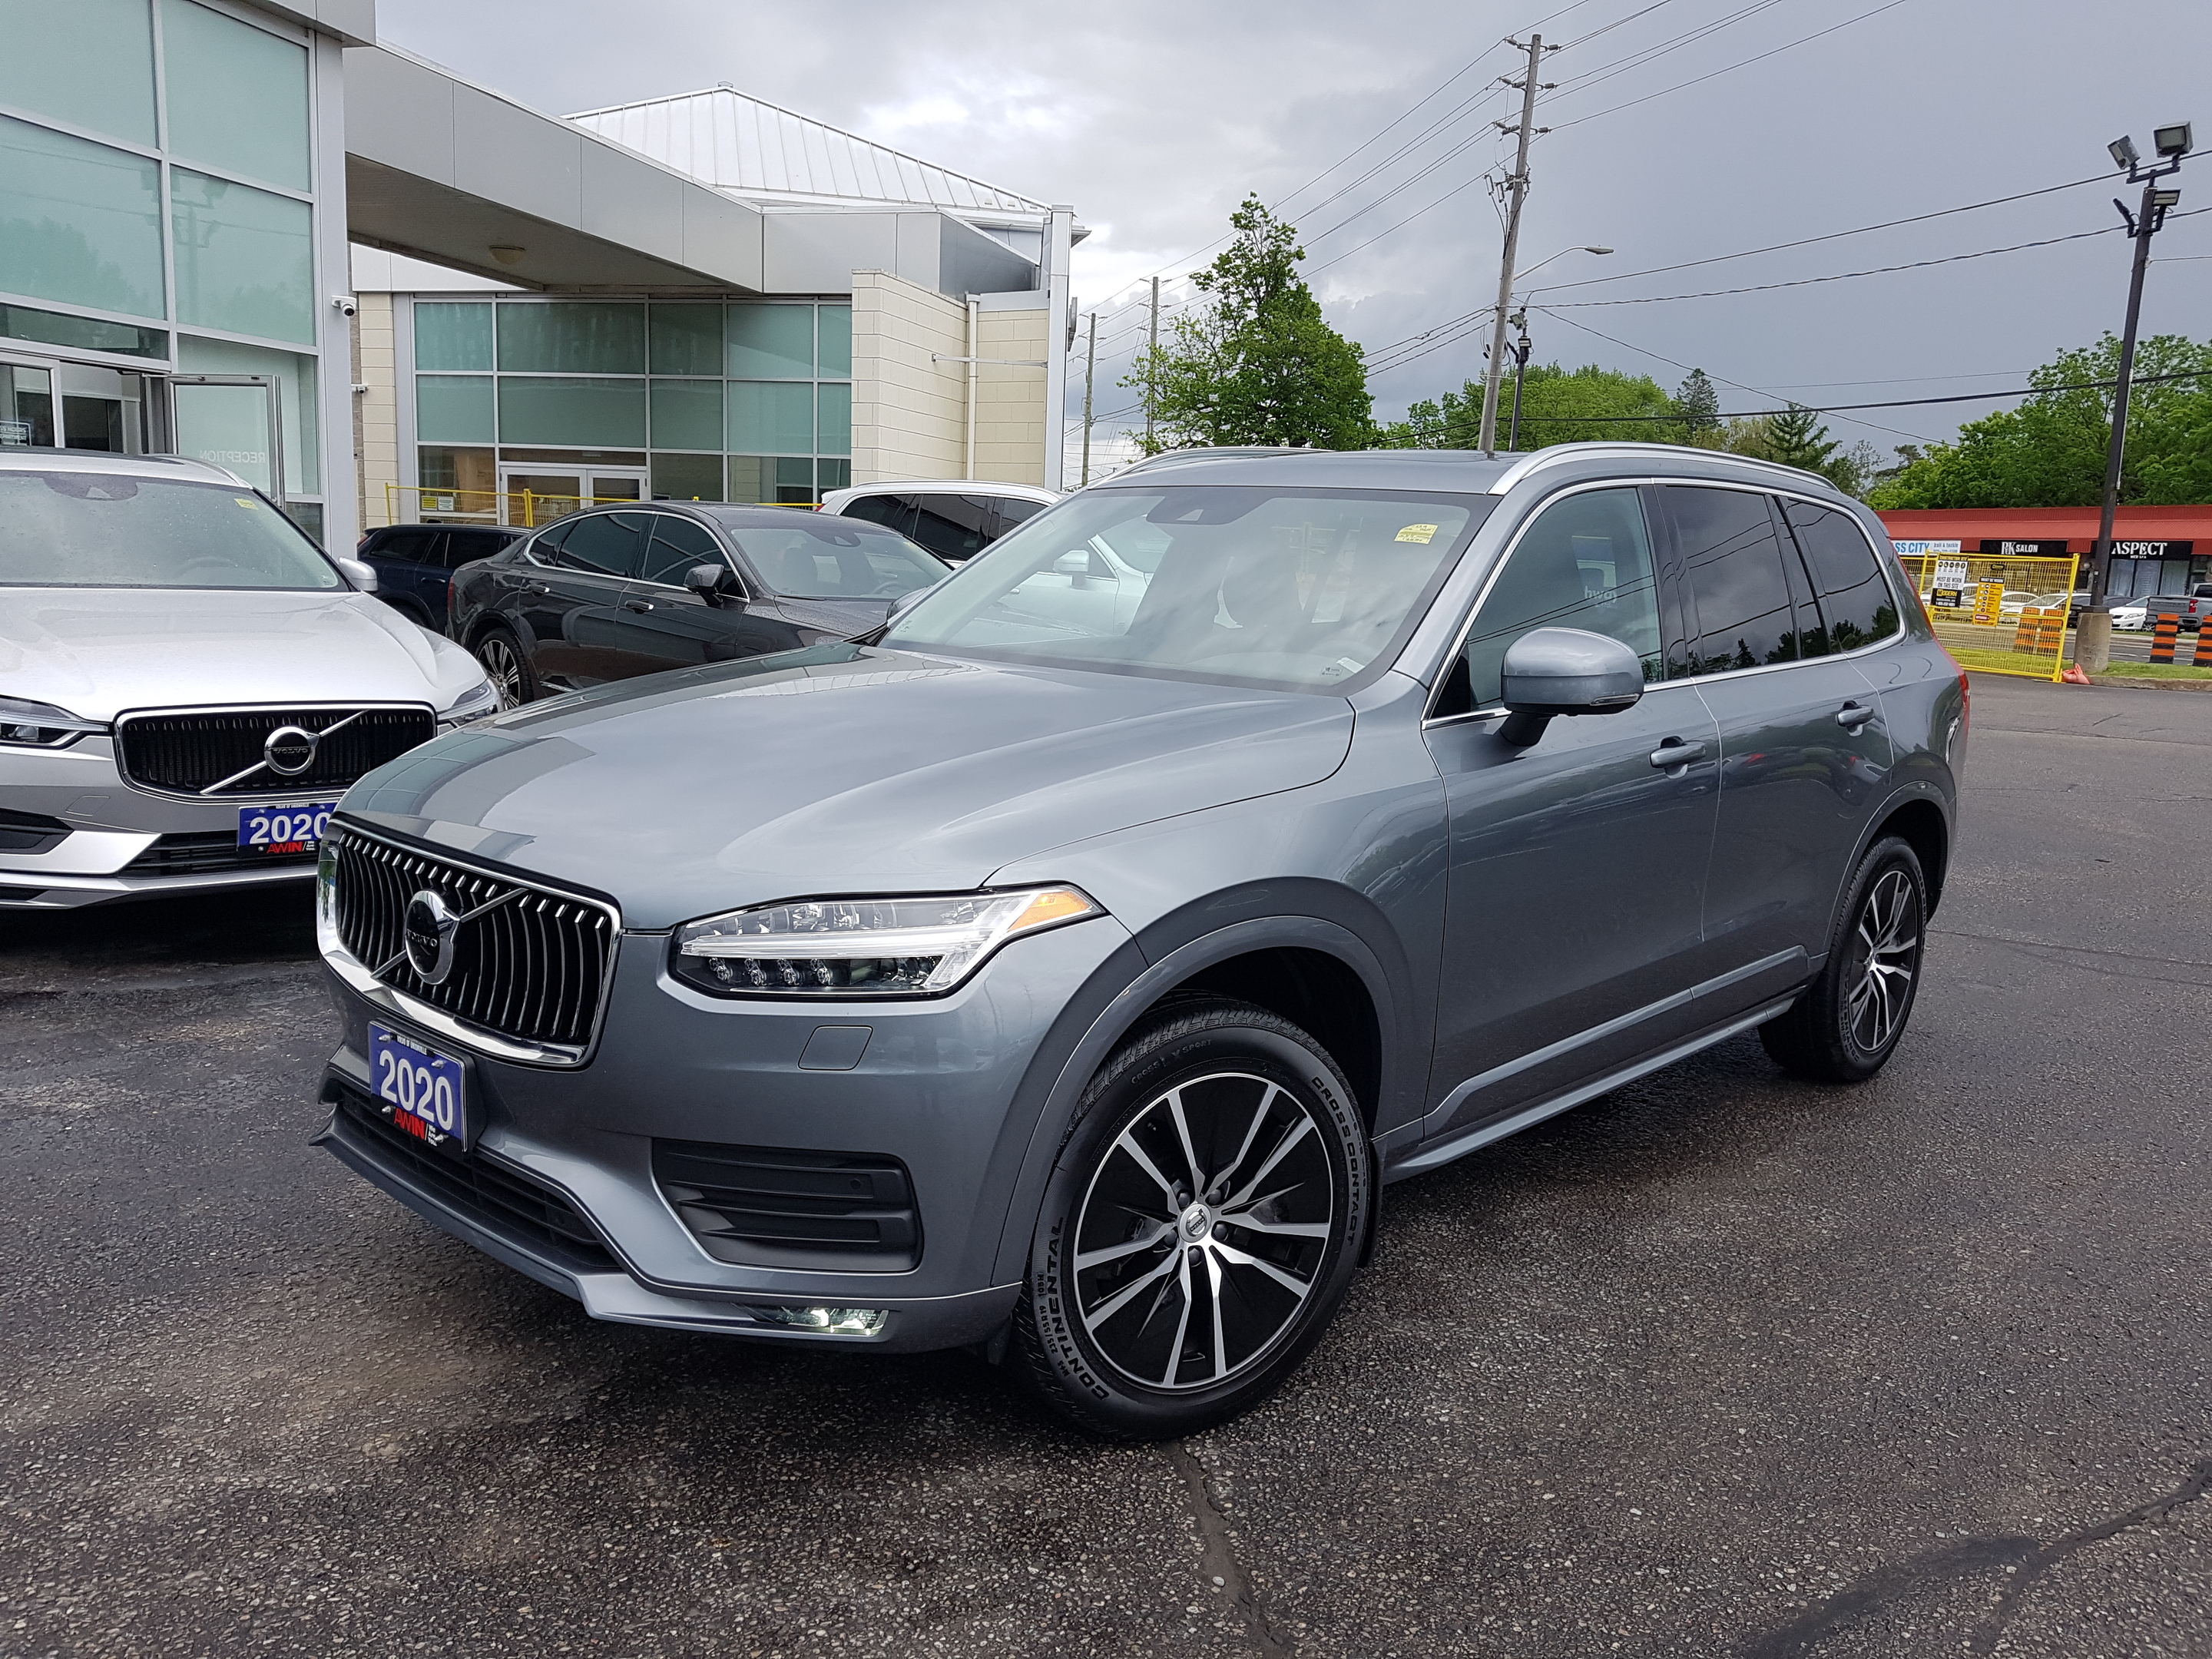 2020 Volvo XC90 T6 AWD Momentum (7-Seat) |CPO|ONLY 32485KMS|